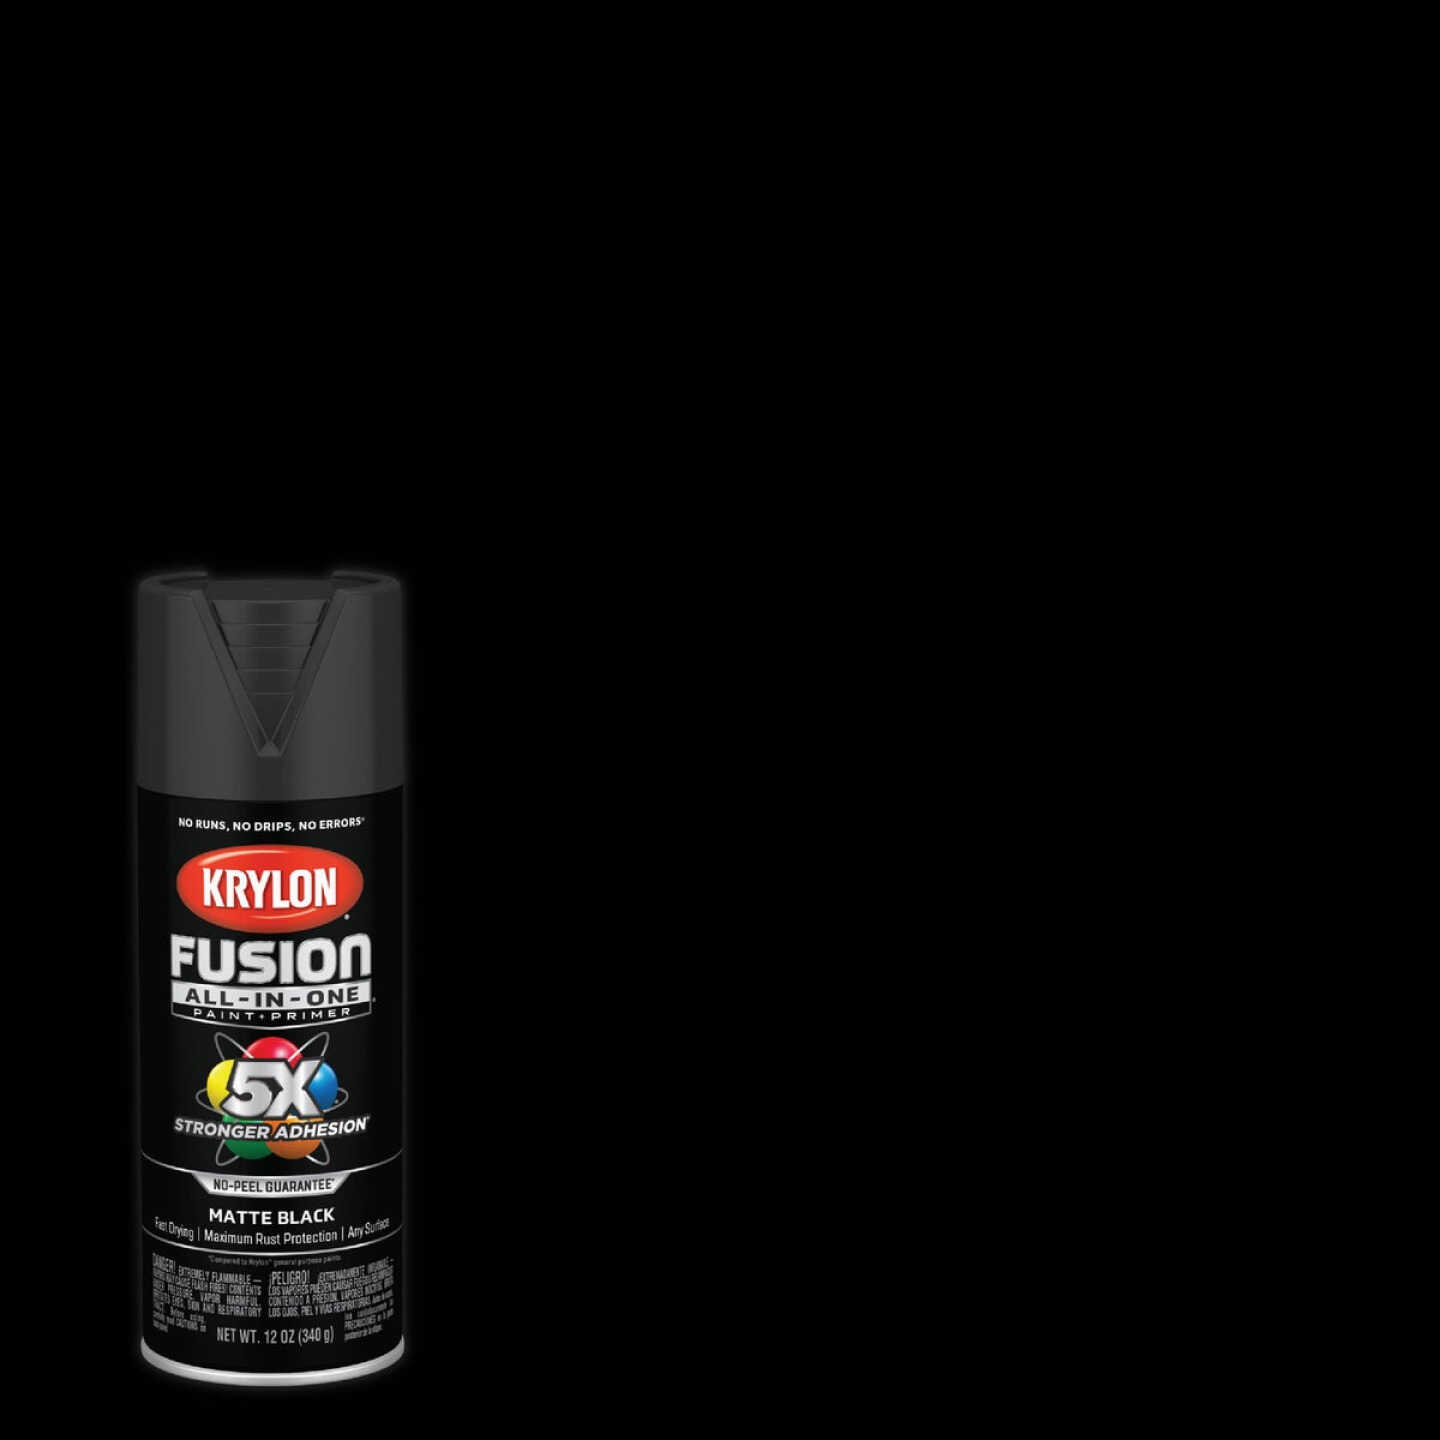 Krylon Fusion All-In-One Matte White Spray Paint and Primer In One